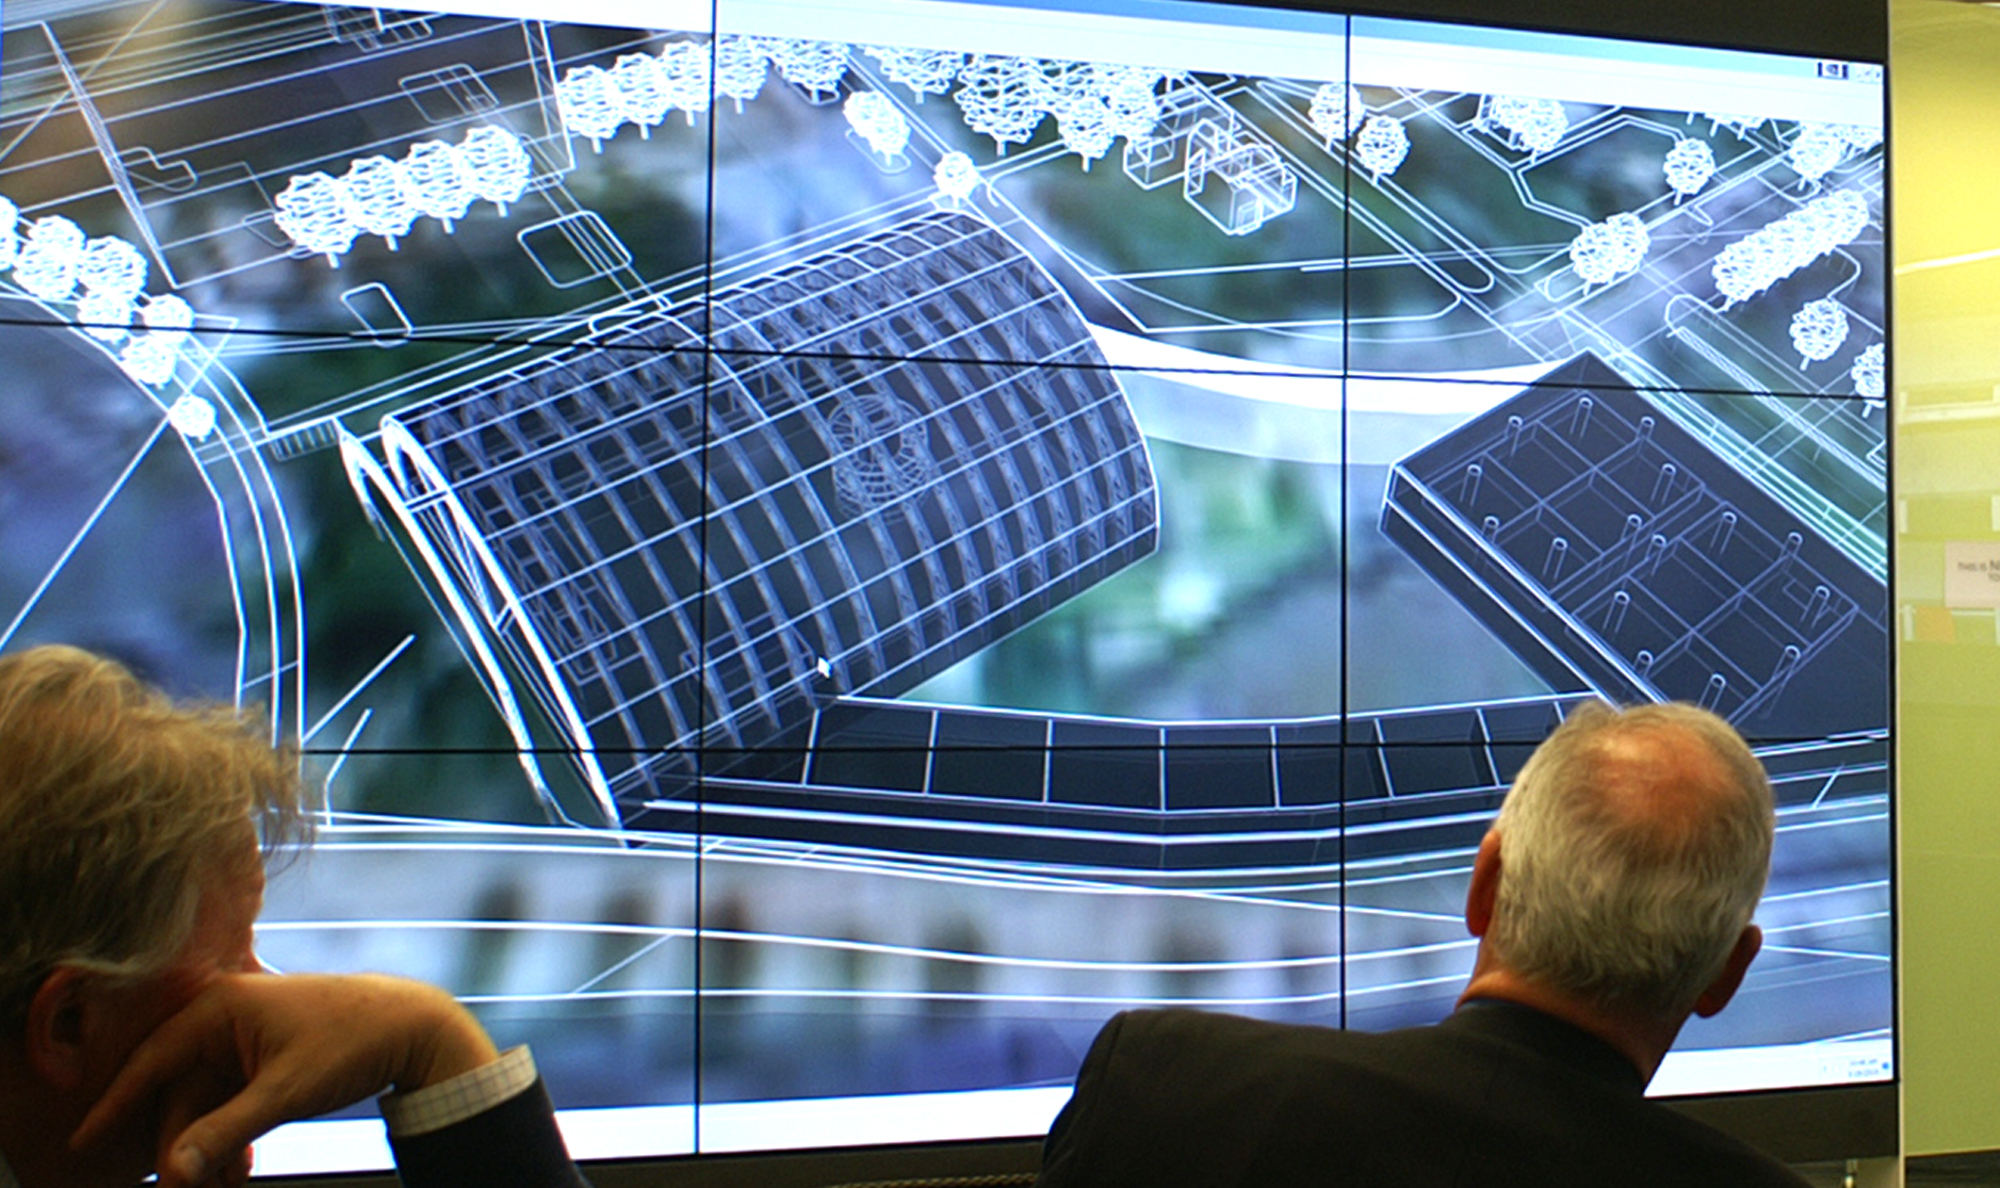 image of people looking at a large screen with architecture drawings